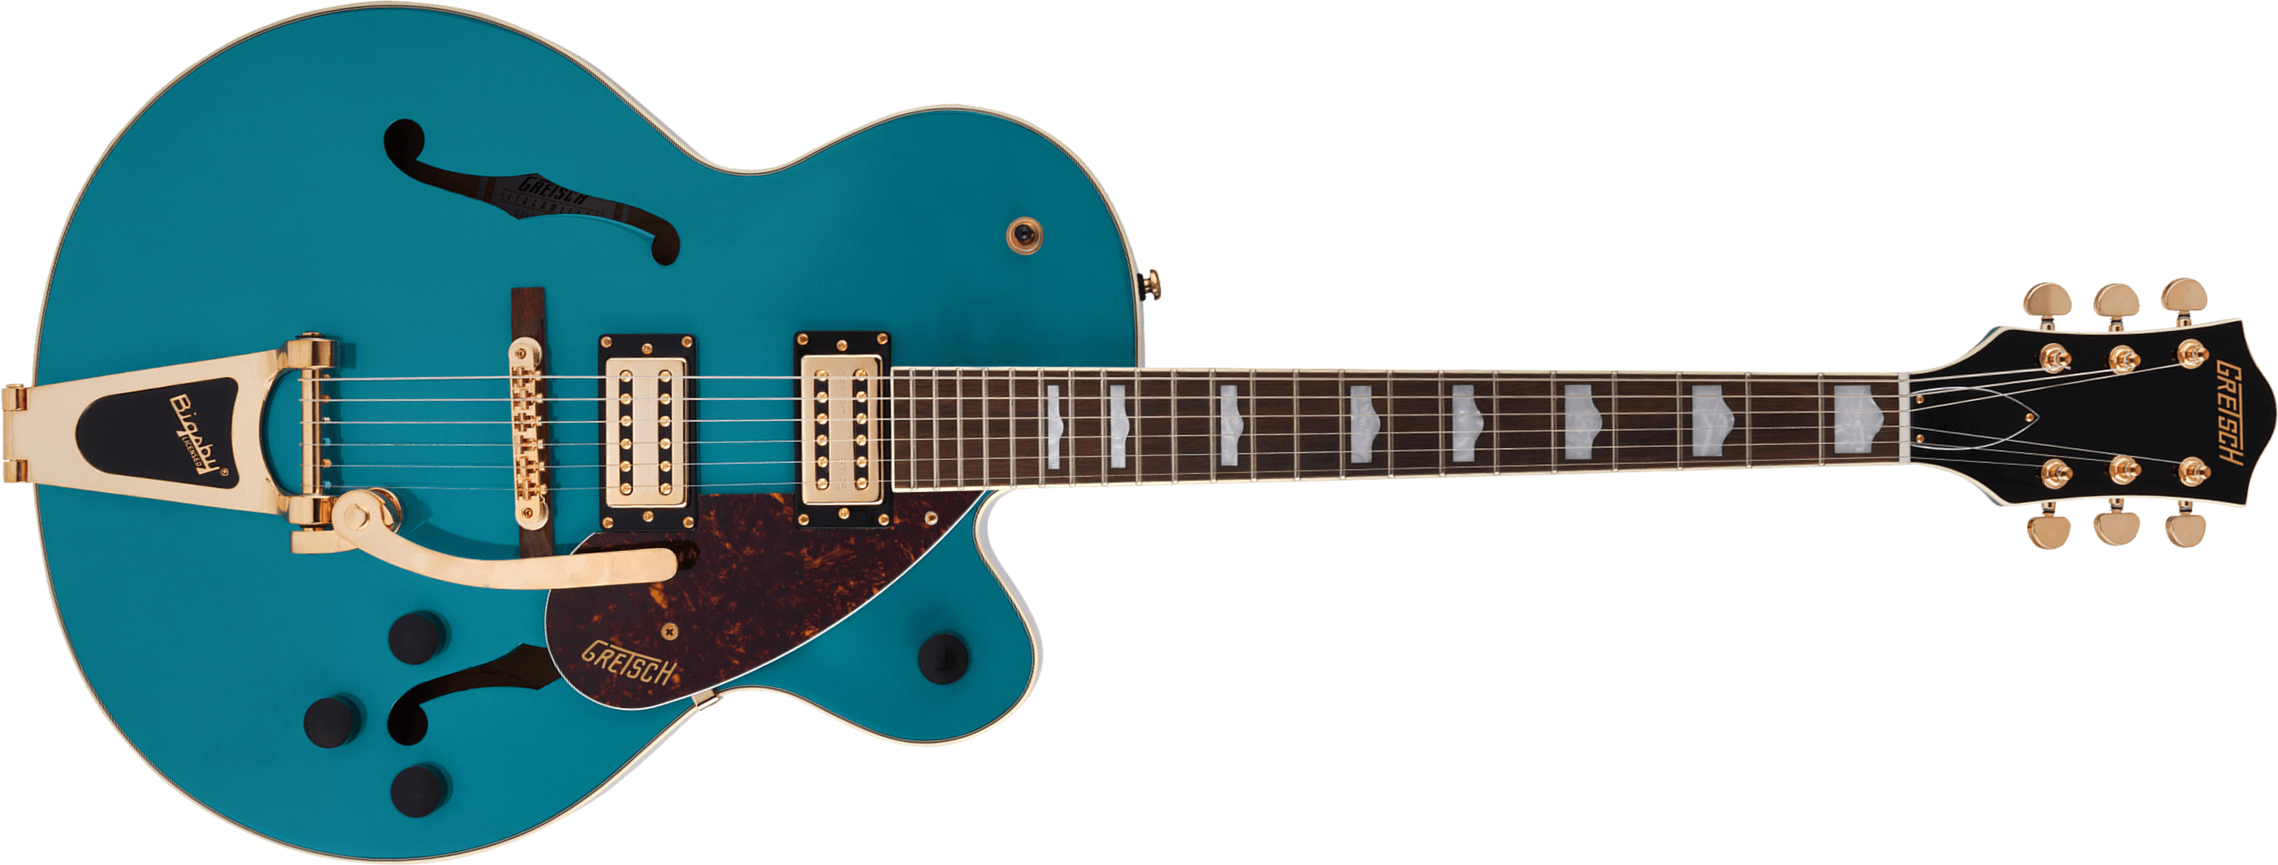 Gretsch G2410tg Streamliner Hollow Body Bigsby Gh Hh Trem Lau - Ocean Turquoise - Semi-hollow electric guitar - Main picture